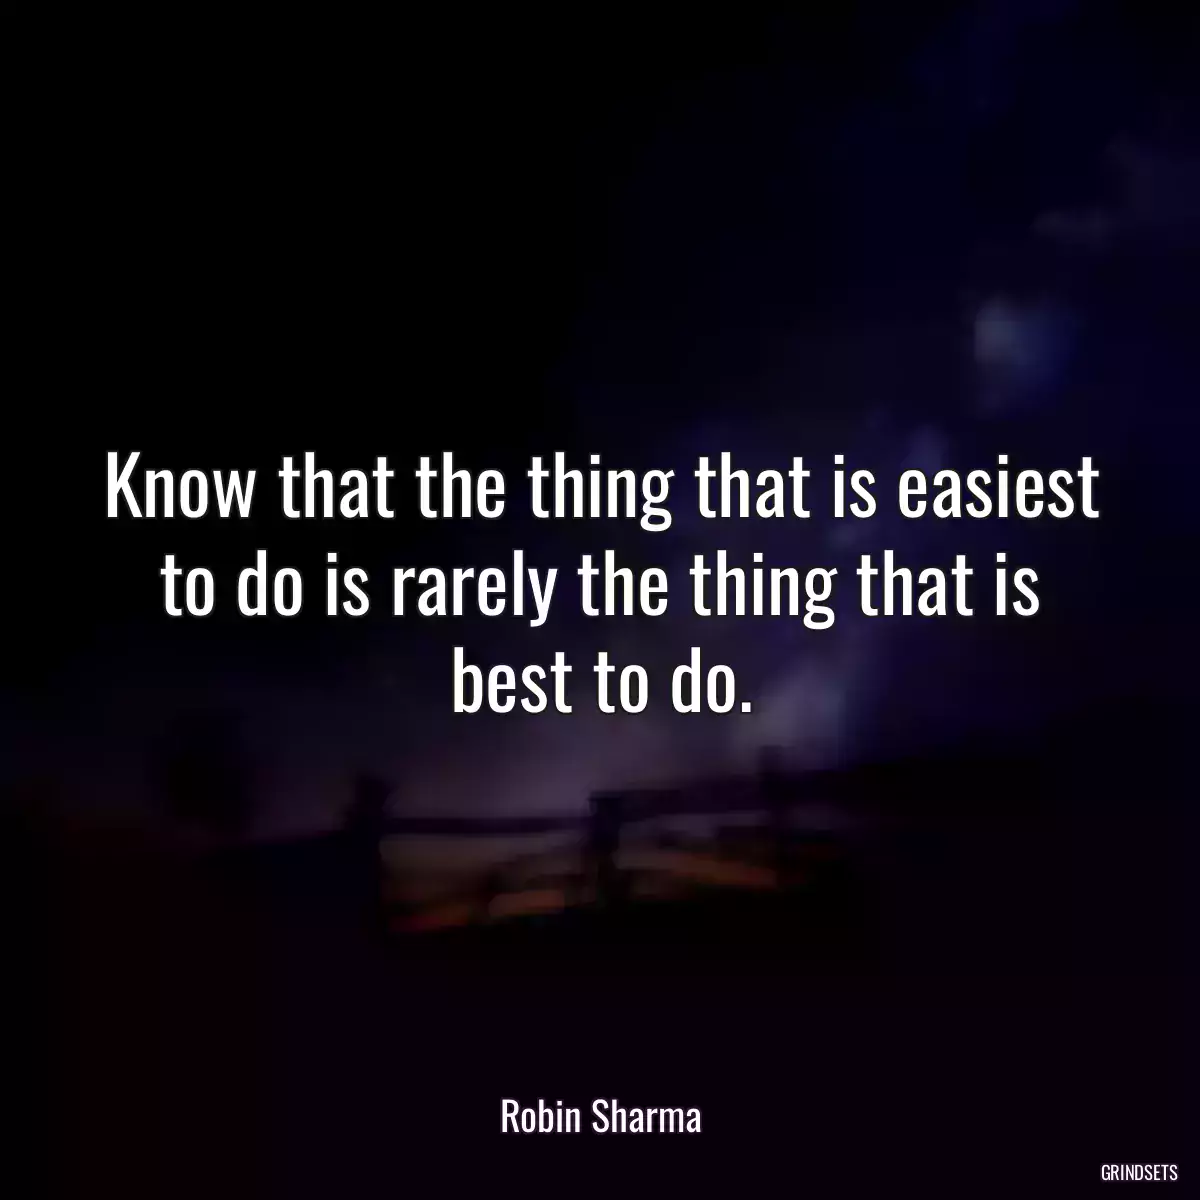 Know that the thing that is easiest to do is rarely the thing that is best to do.